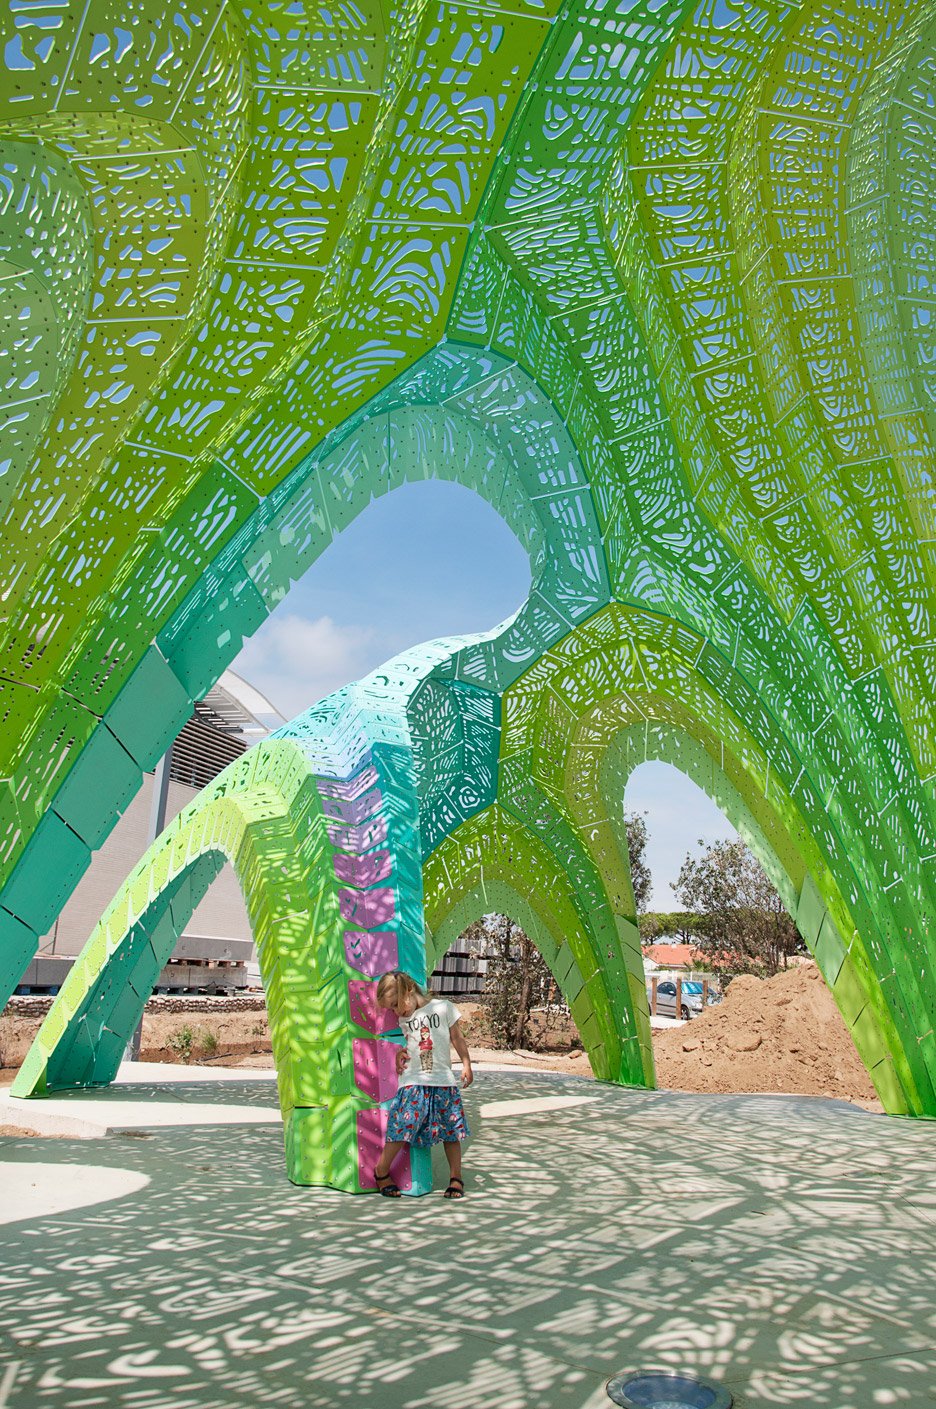 Pleated Inflation by Marc Fornes in Argeles, France